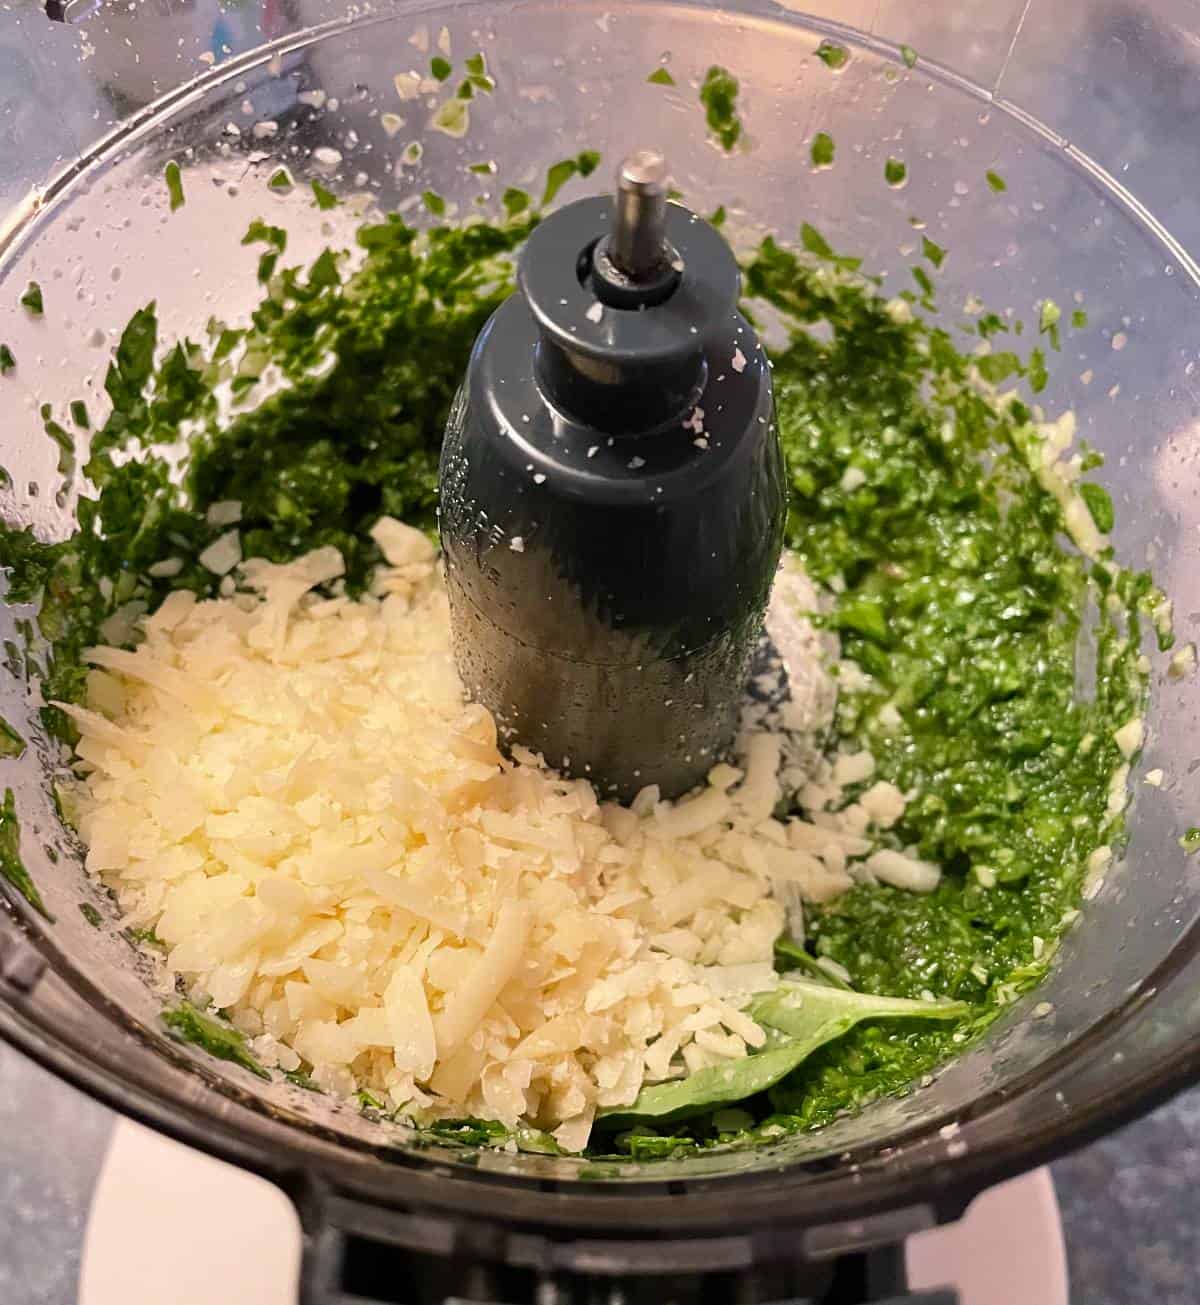 Grated parmesan cheese being added to a food processor, along with a radish green pesto puree.